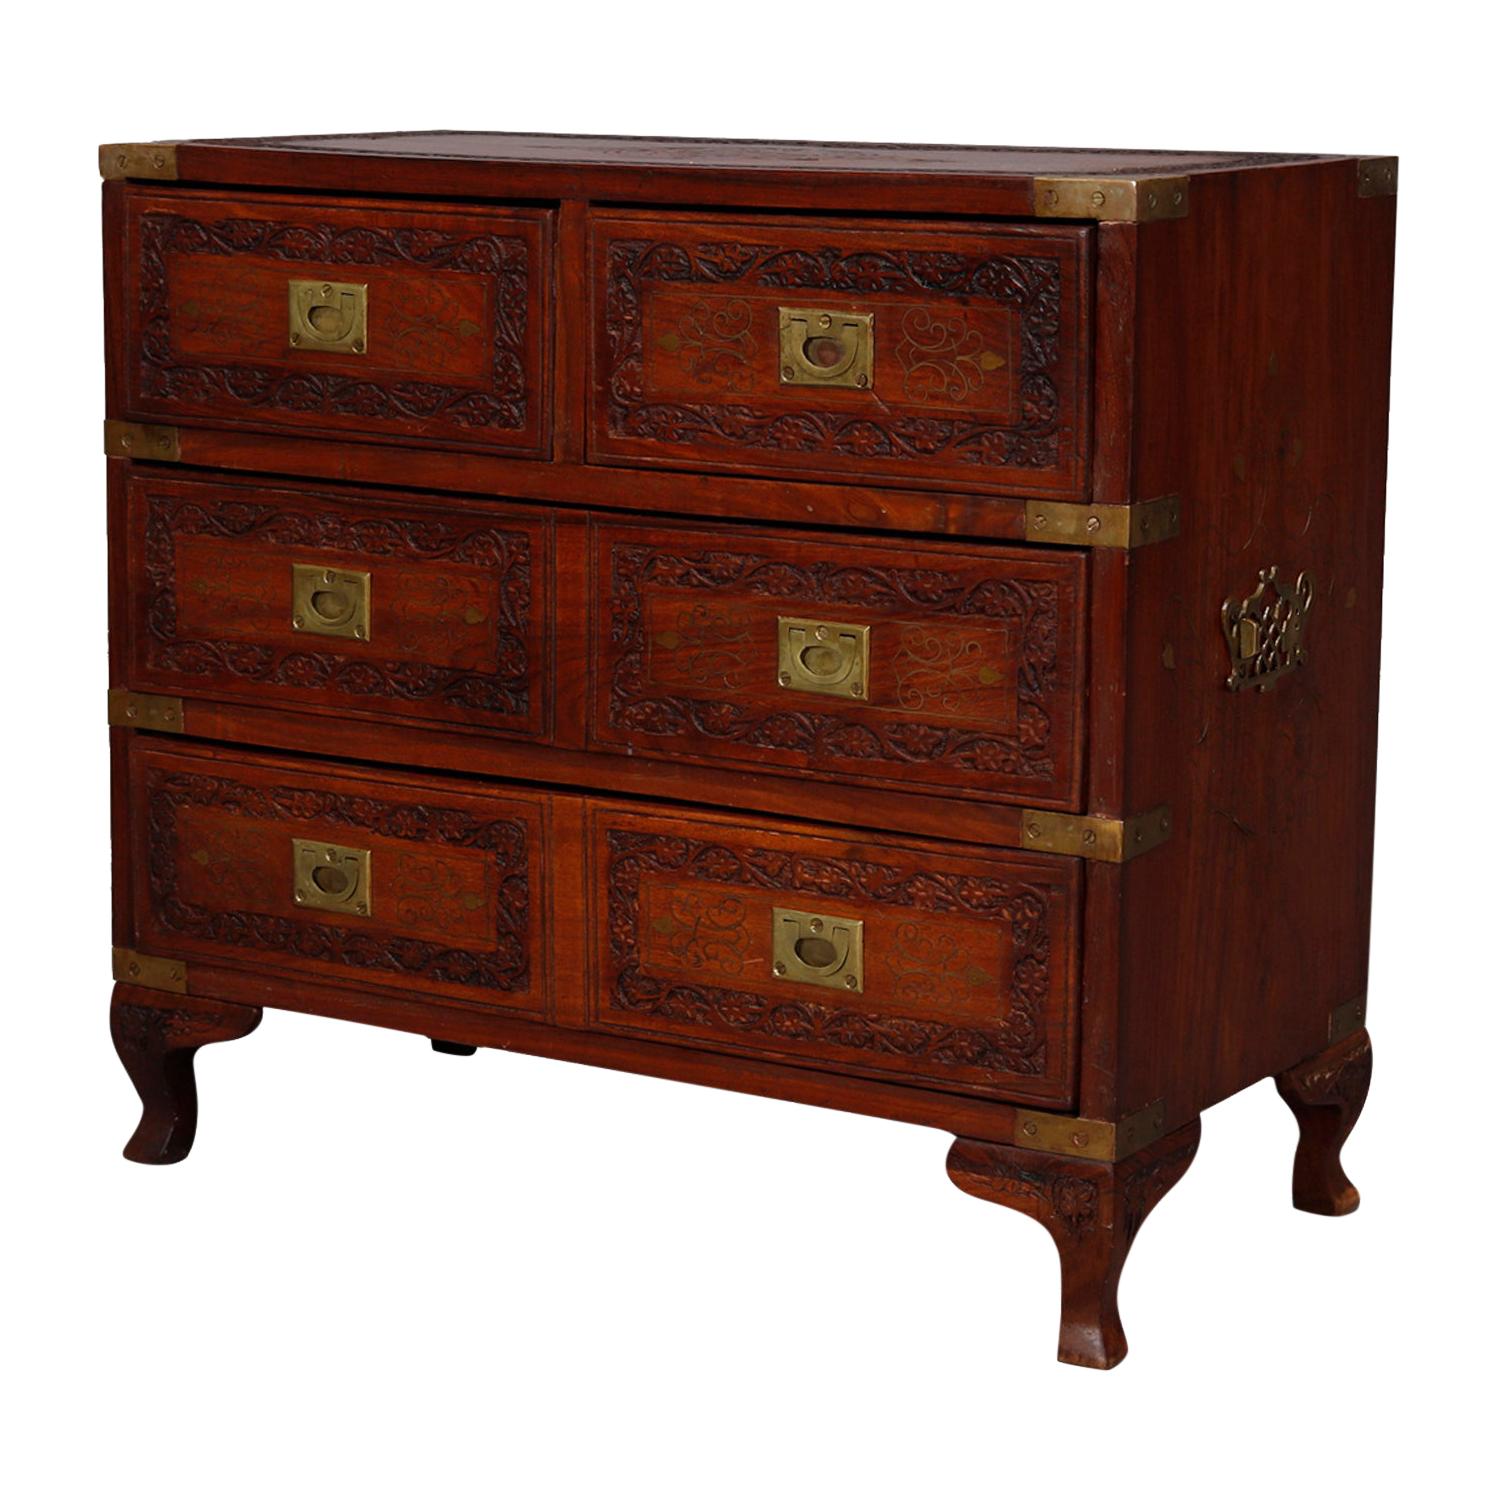 Persian Carved Mahogany and Damscene Four-Drawer Dowry Chest, 20th Century